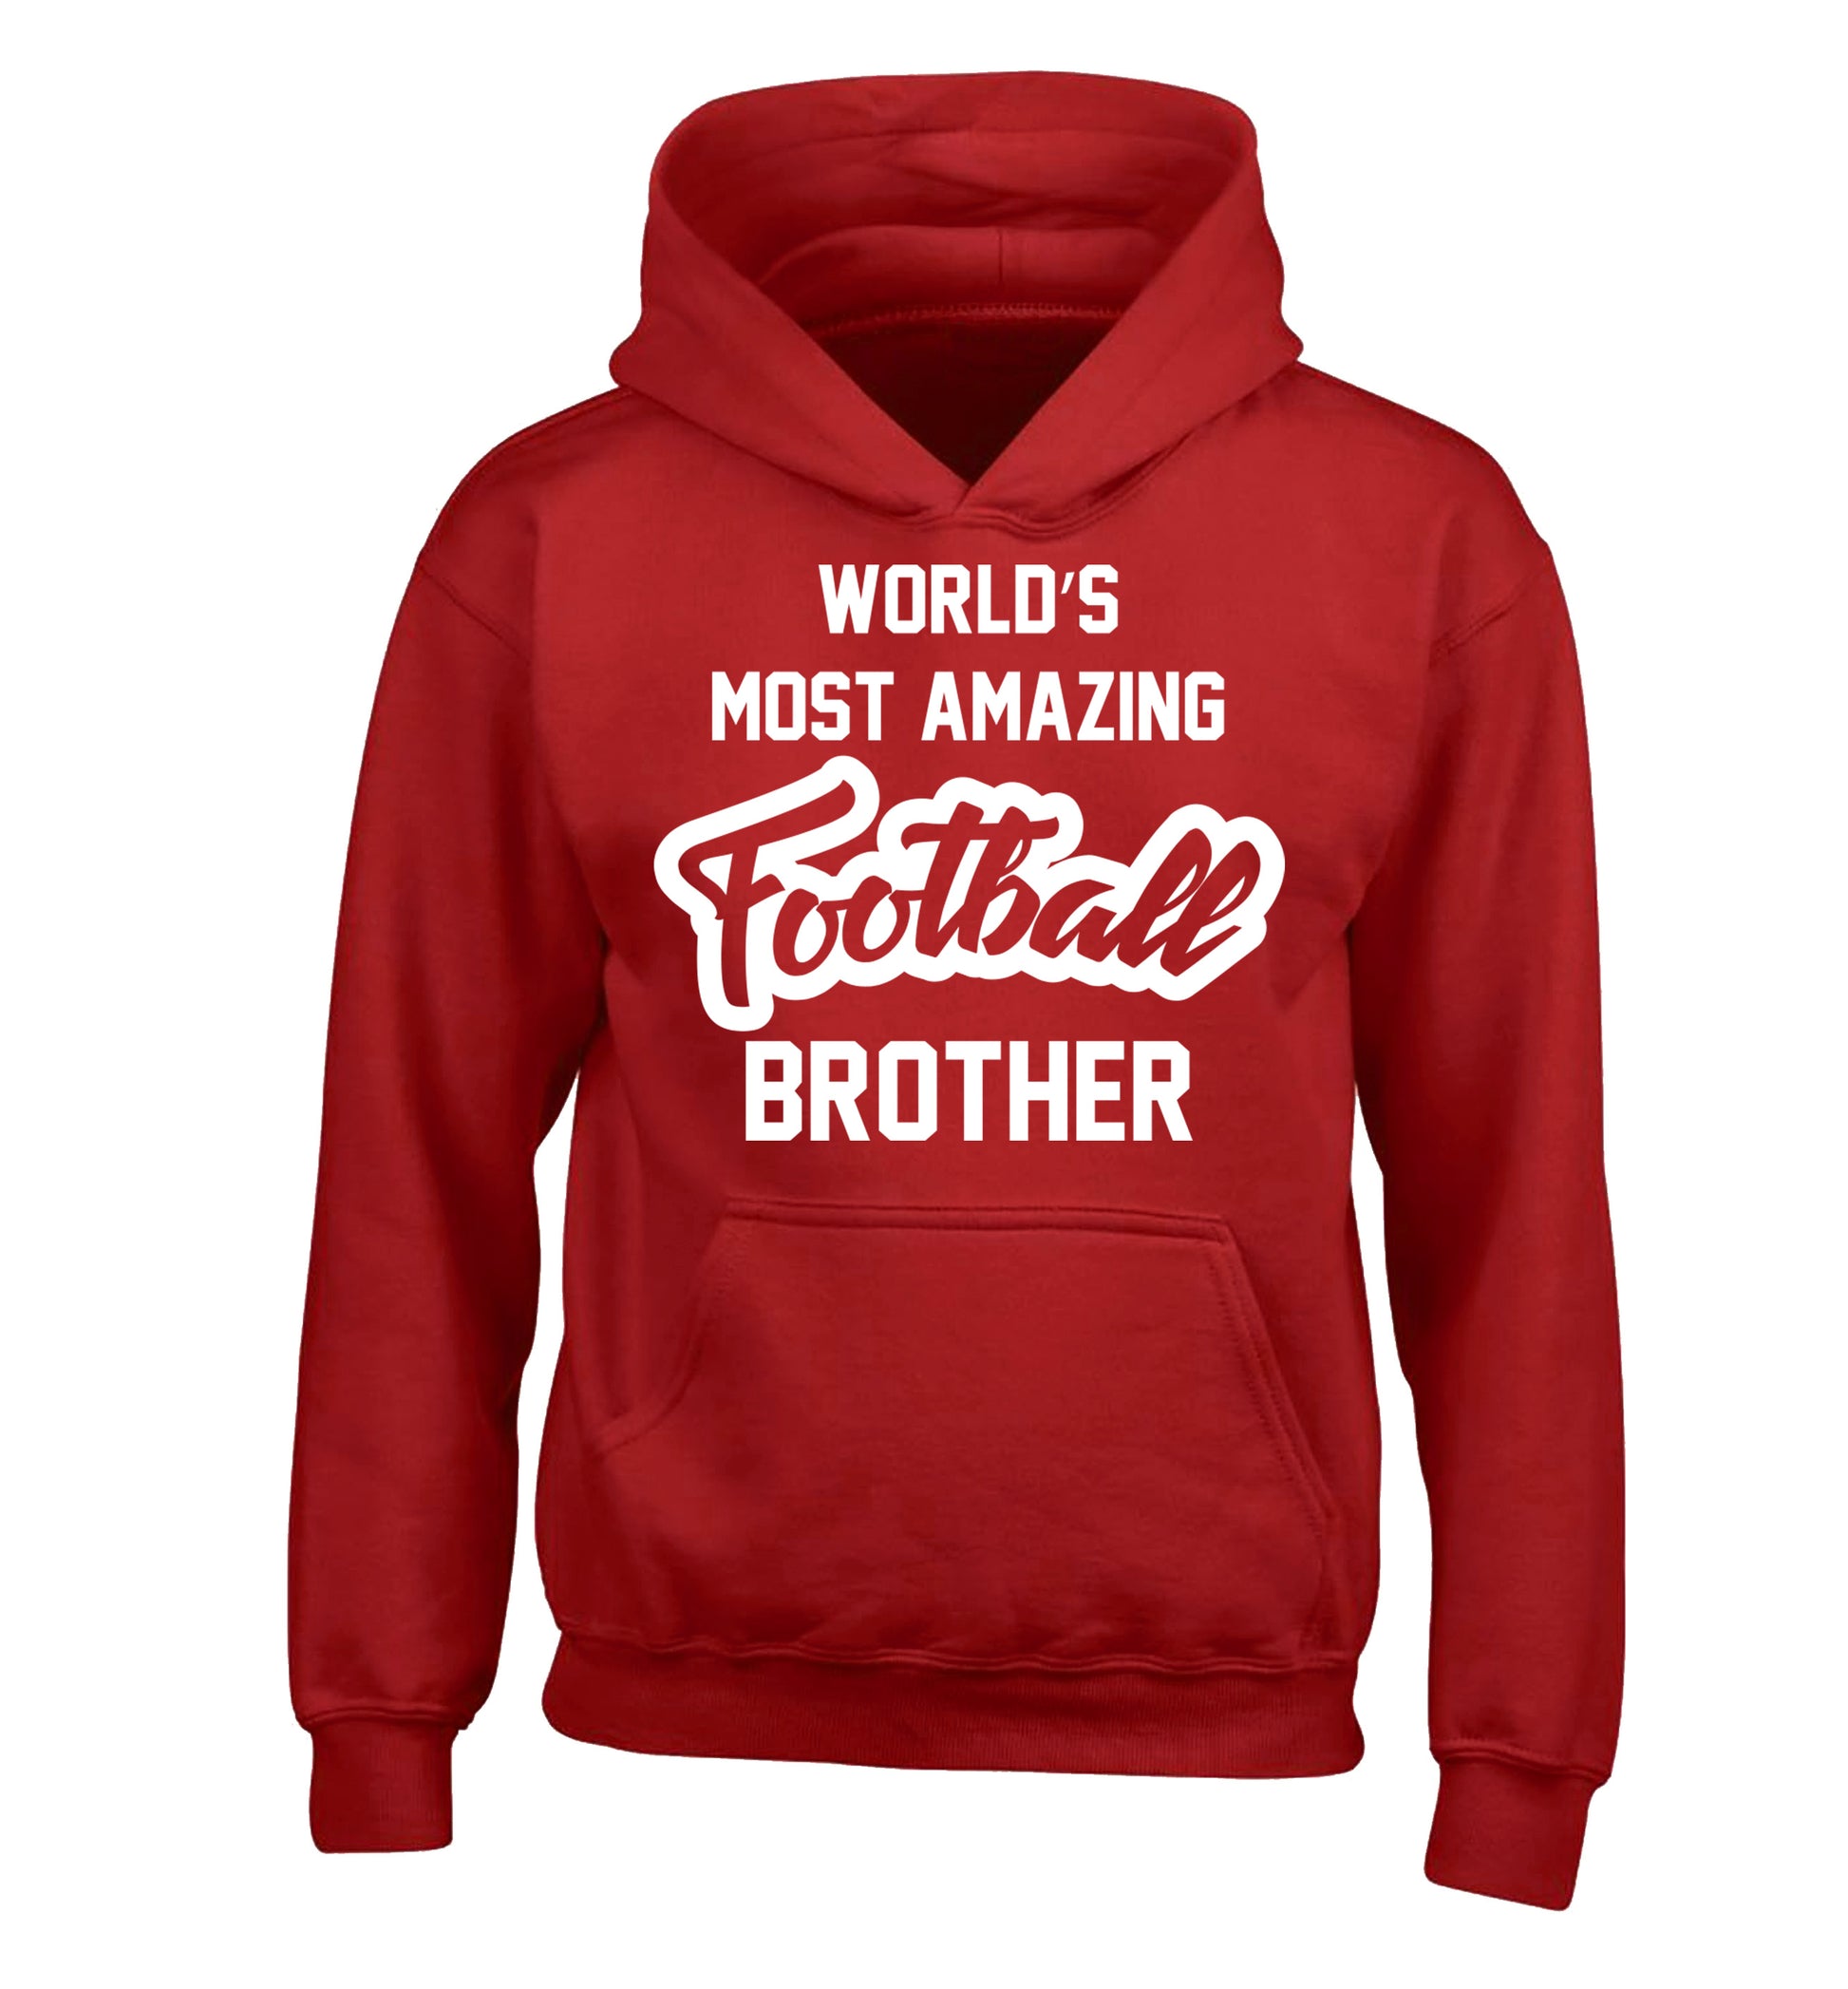 Worlds most amazing football brother children's red hoodie 12-14 Years